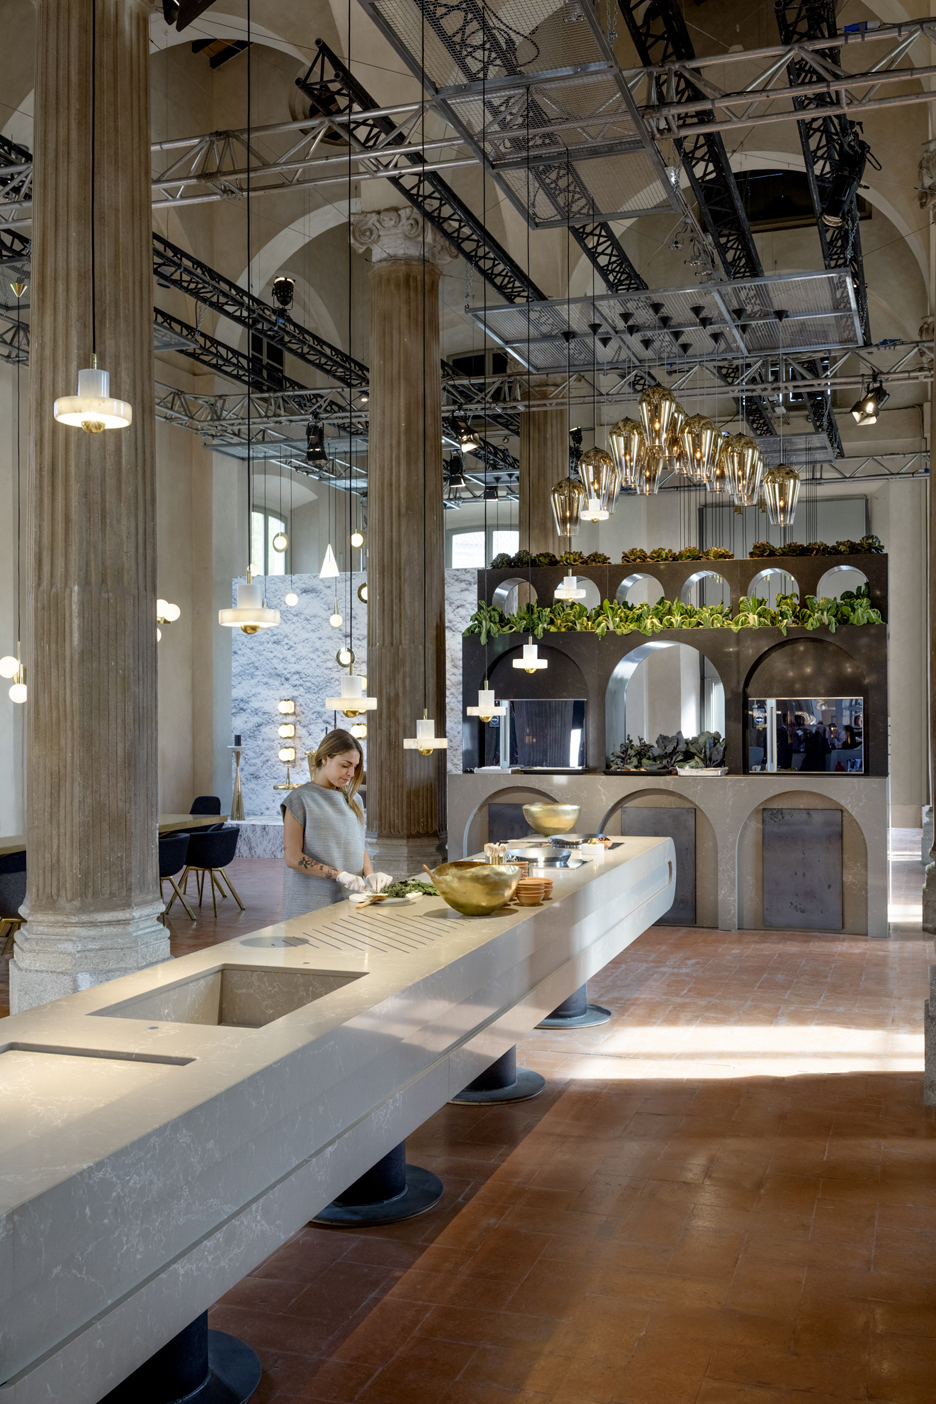 The Restaurant by Tom Dixon for Caesarstone in Milan 2016